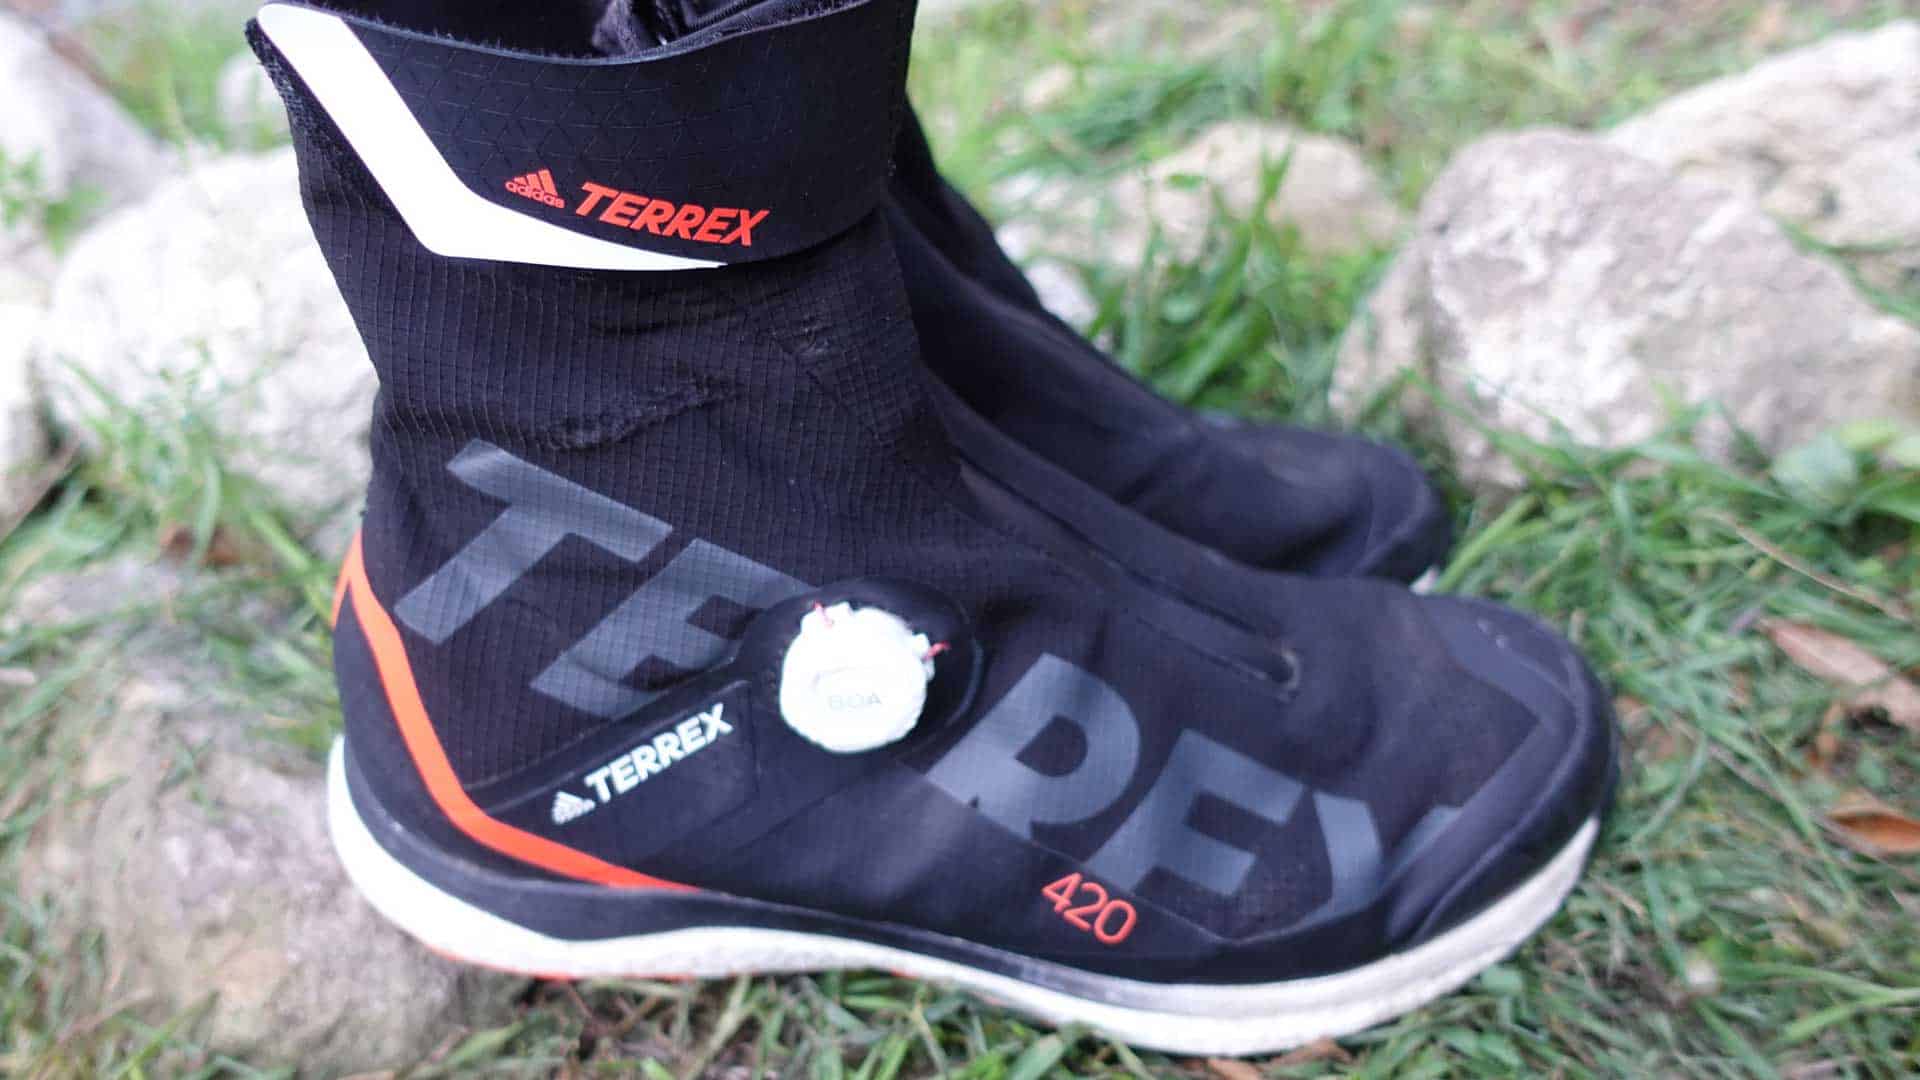 Review: Adidas Terrex Agravic Tech Pro (Winter) Trail Running Shoes